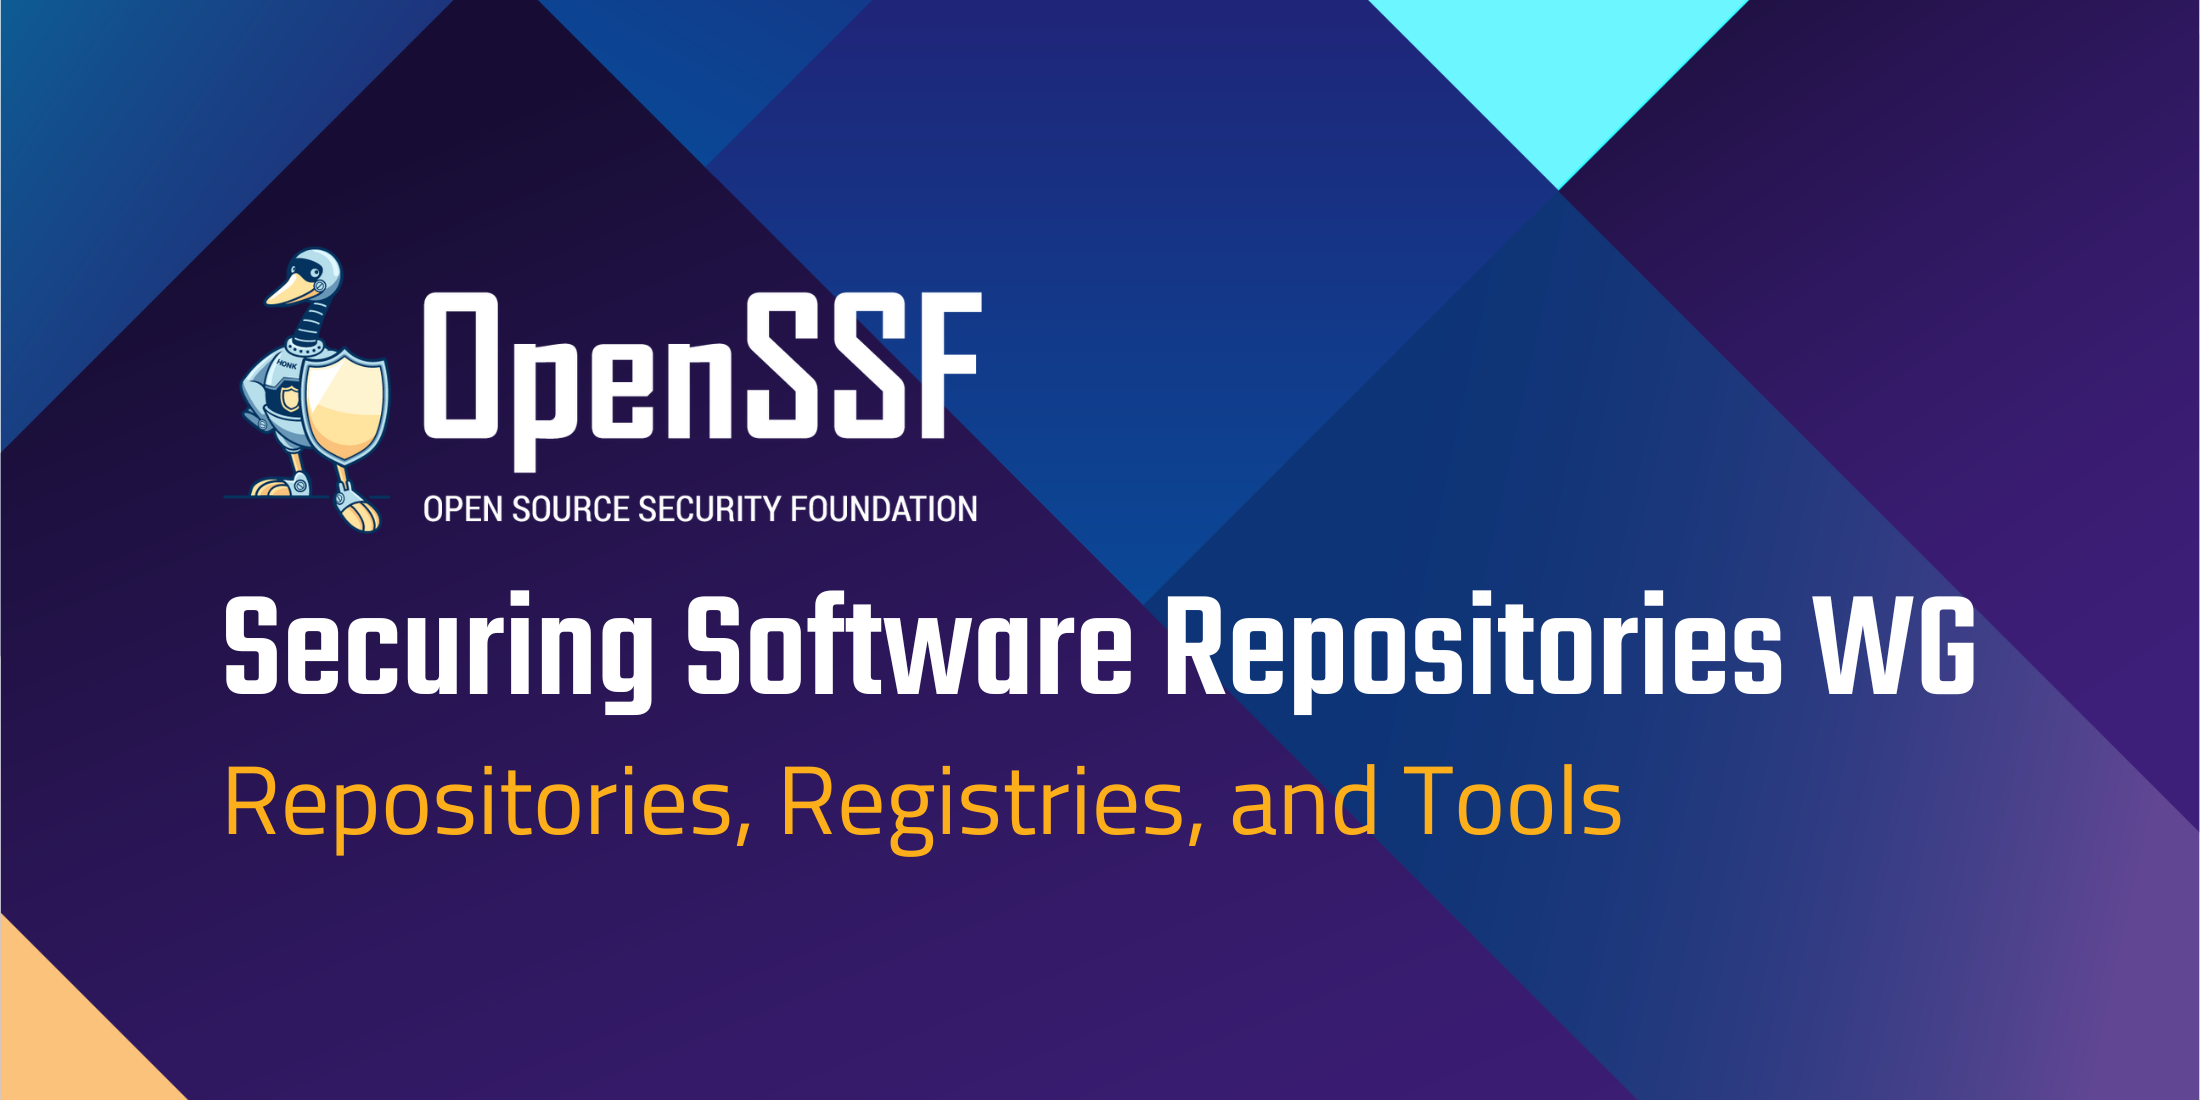 OpenSSF Securing Software Repositories Working Group